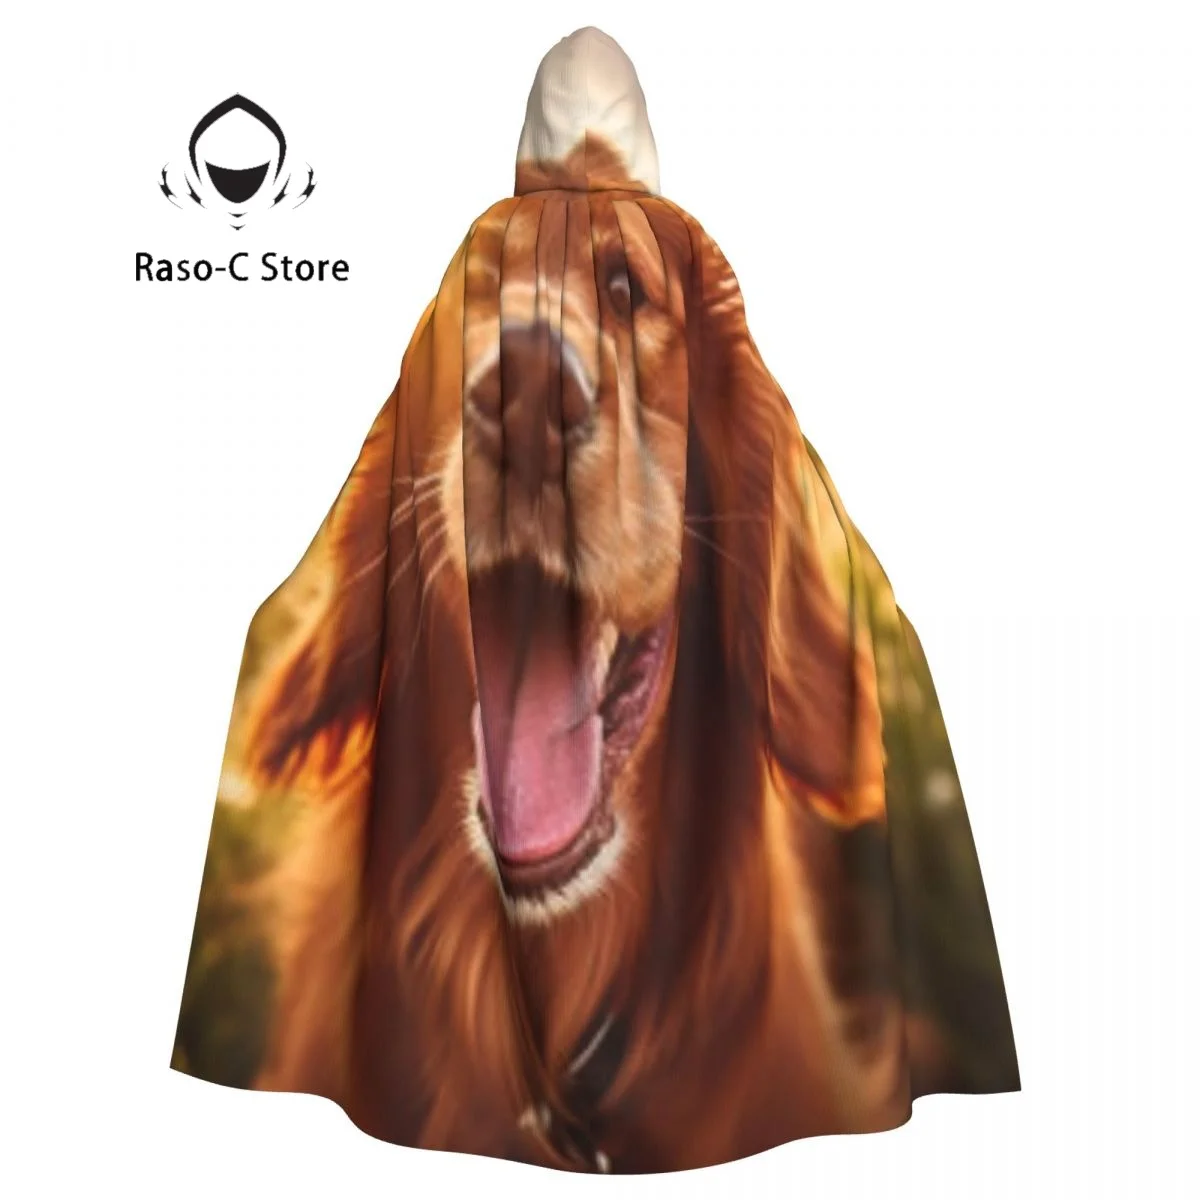 

Unisex Witch Party Reversible Hooded Adult Vampires Cape Cloak Cocker Spaniel Dog